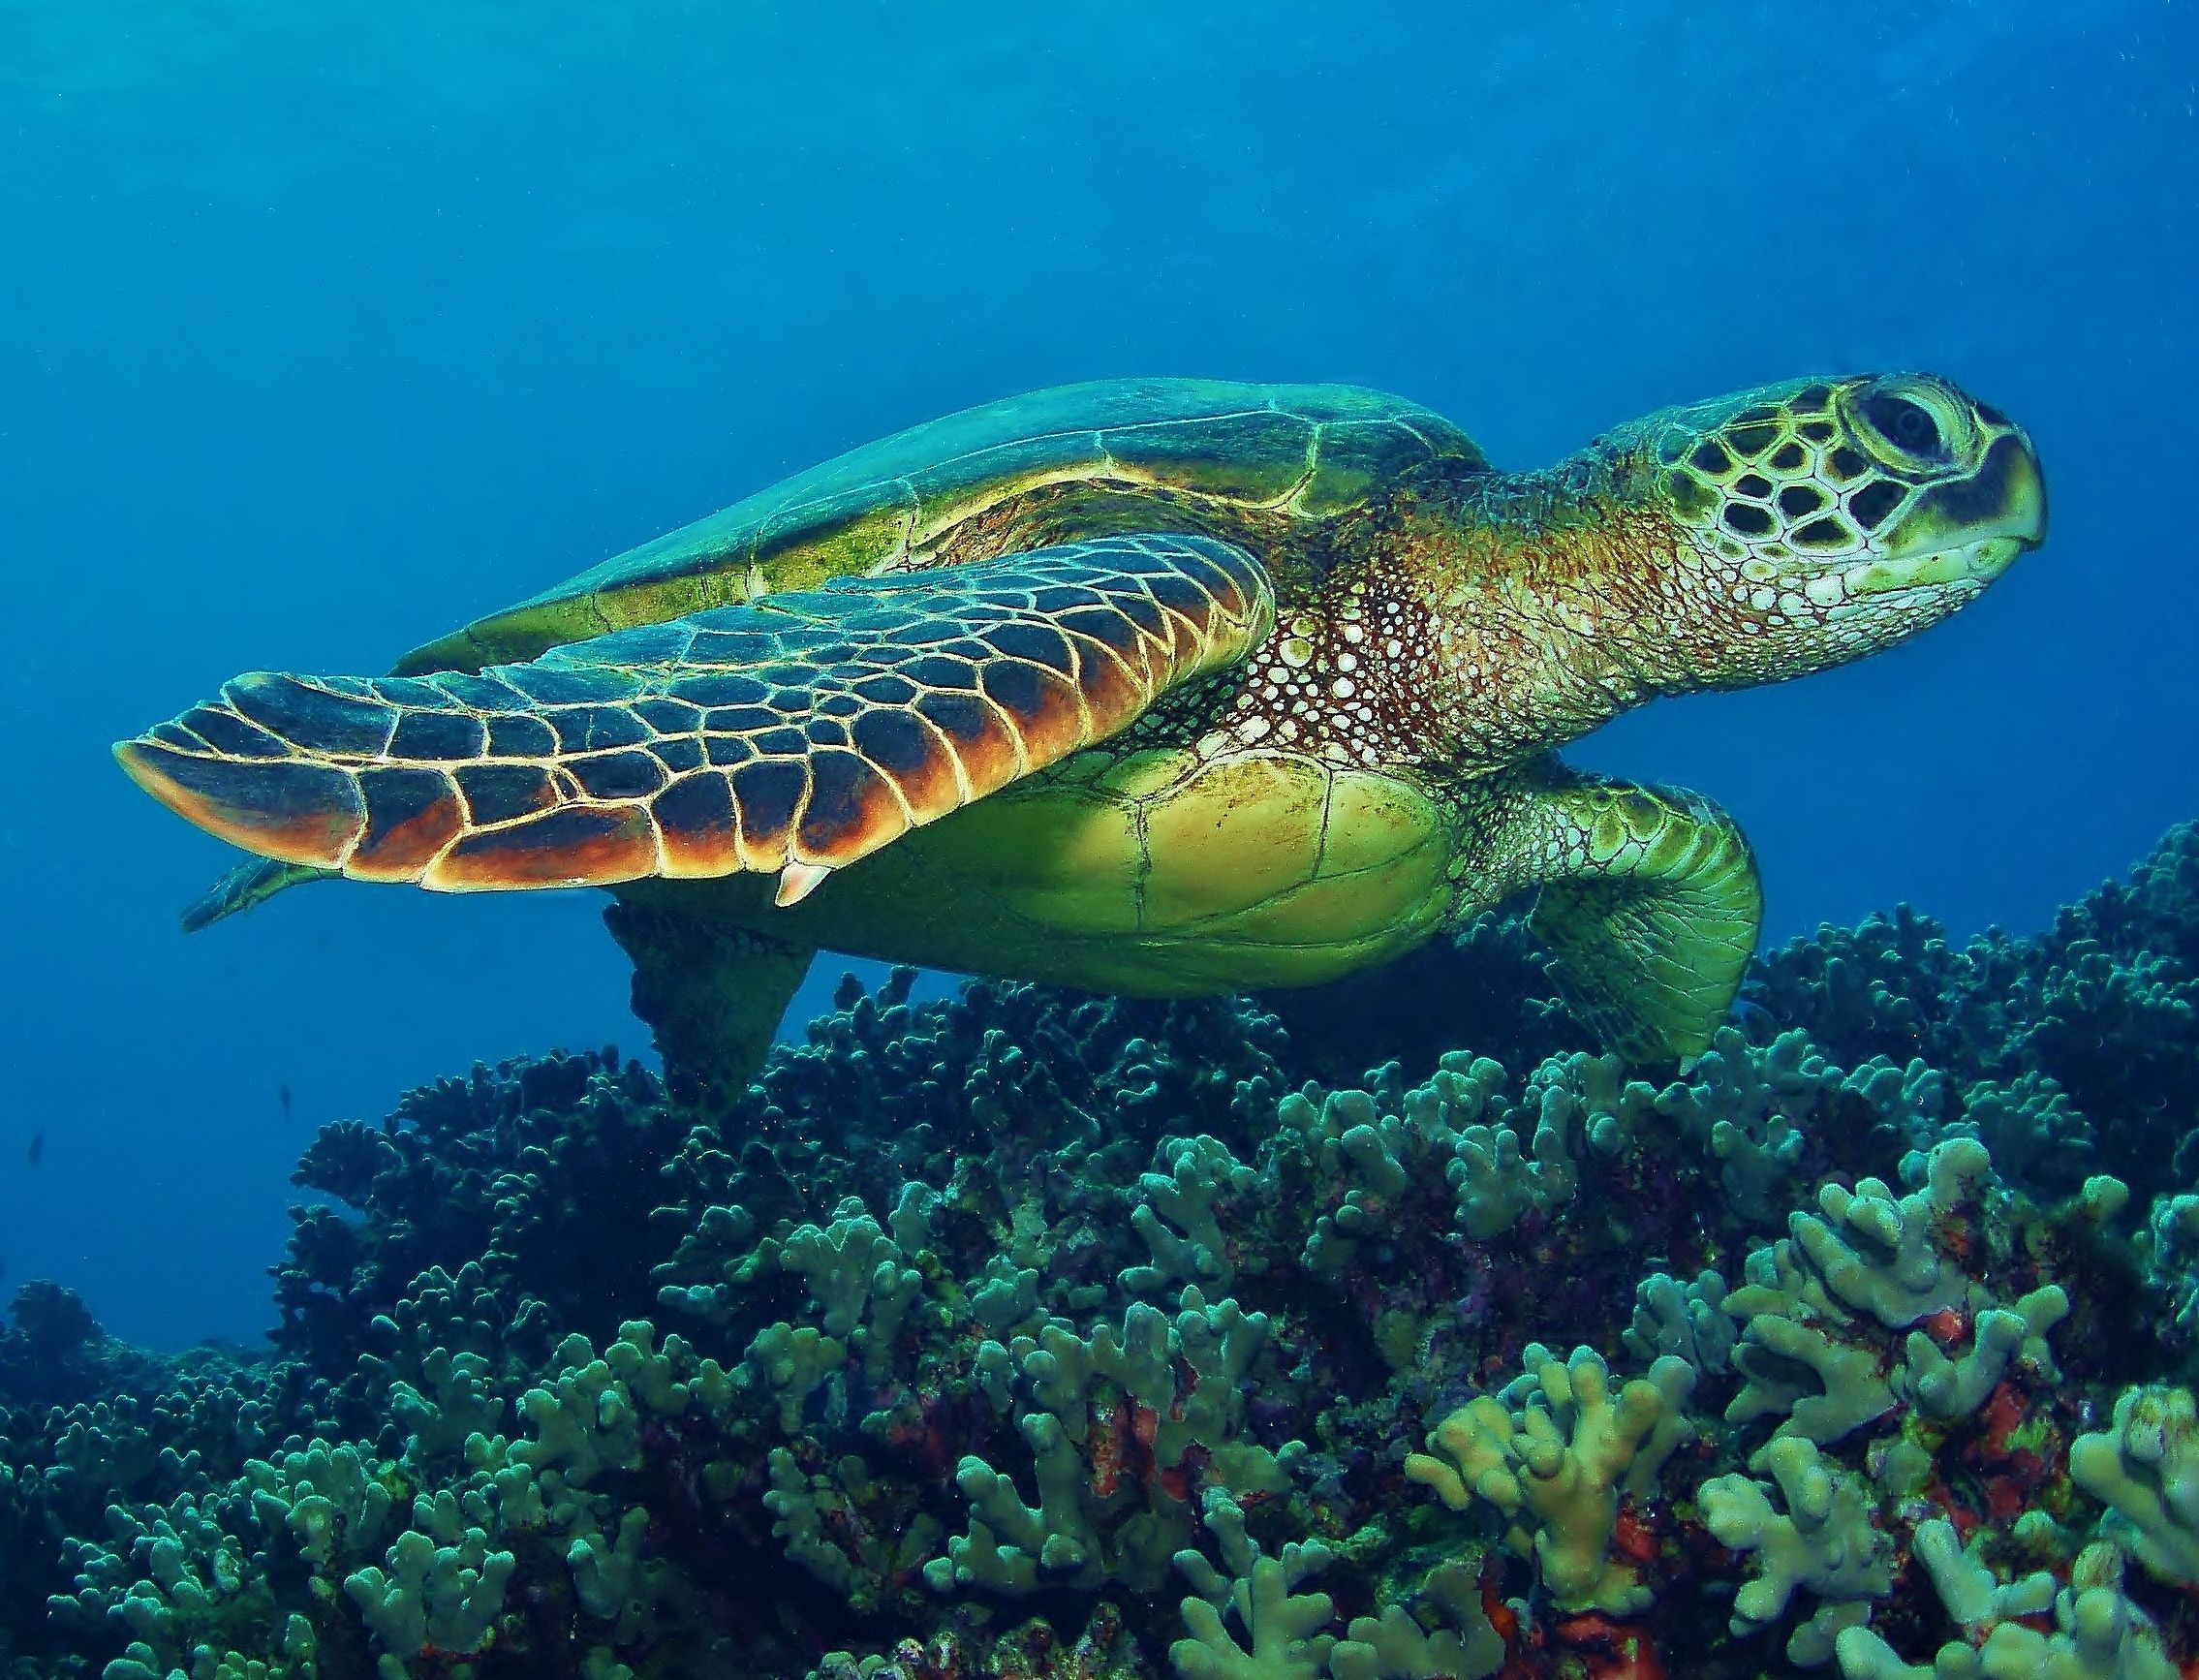 Sea turtles have a commensal relationship with barnacles